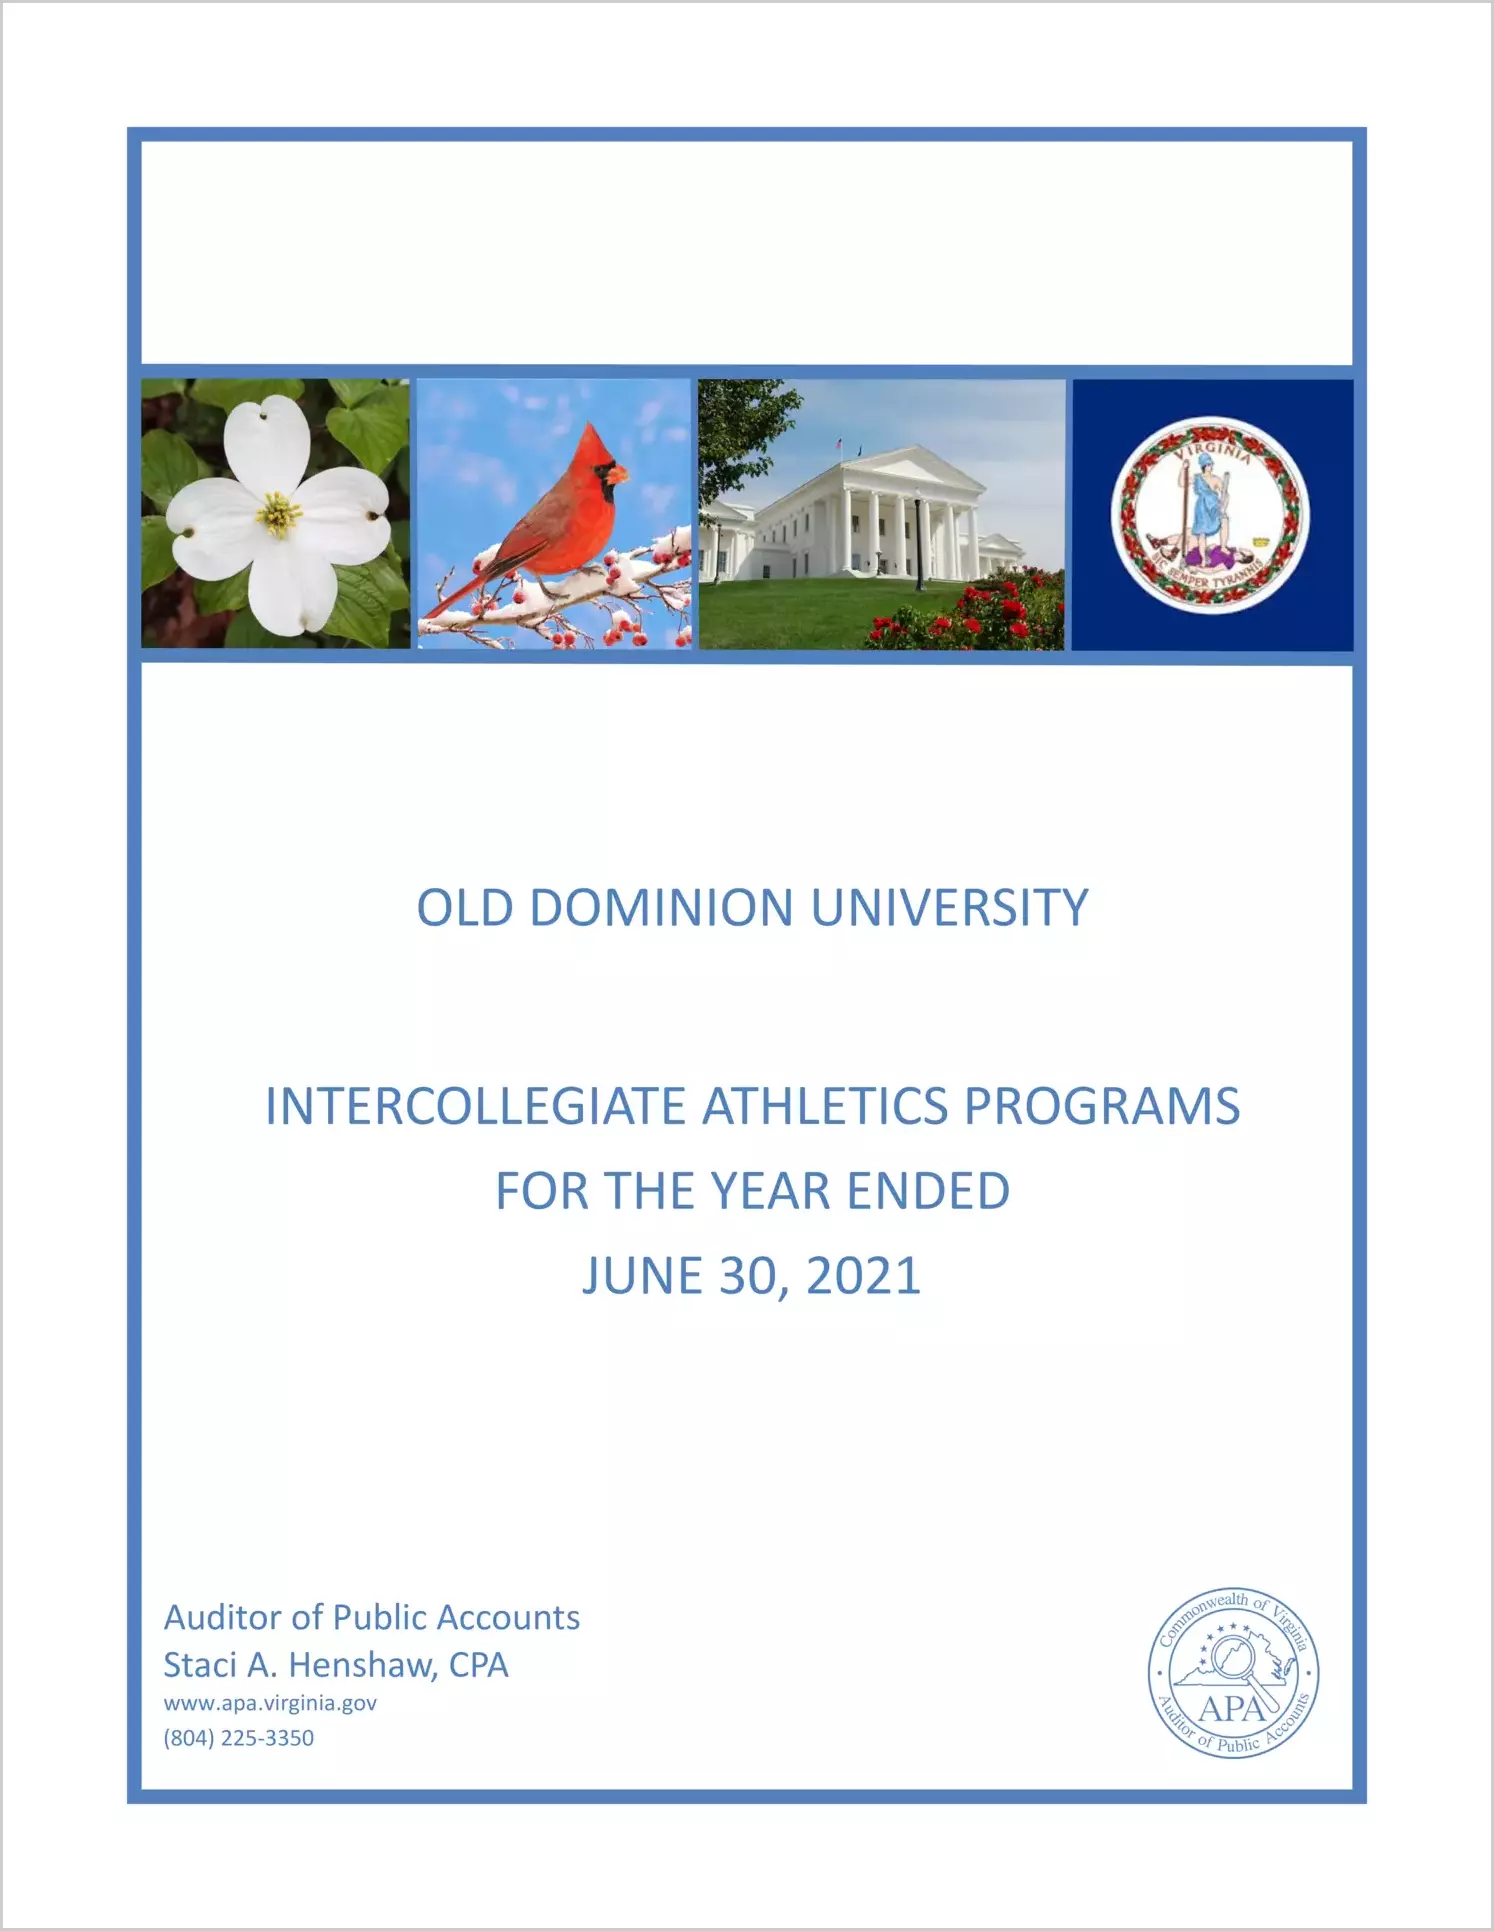 Old Dominion University Intercollegiate Athletics Programs for the year ended June 30, 2021